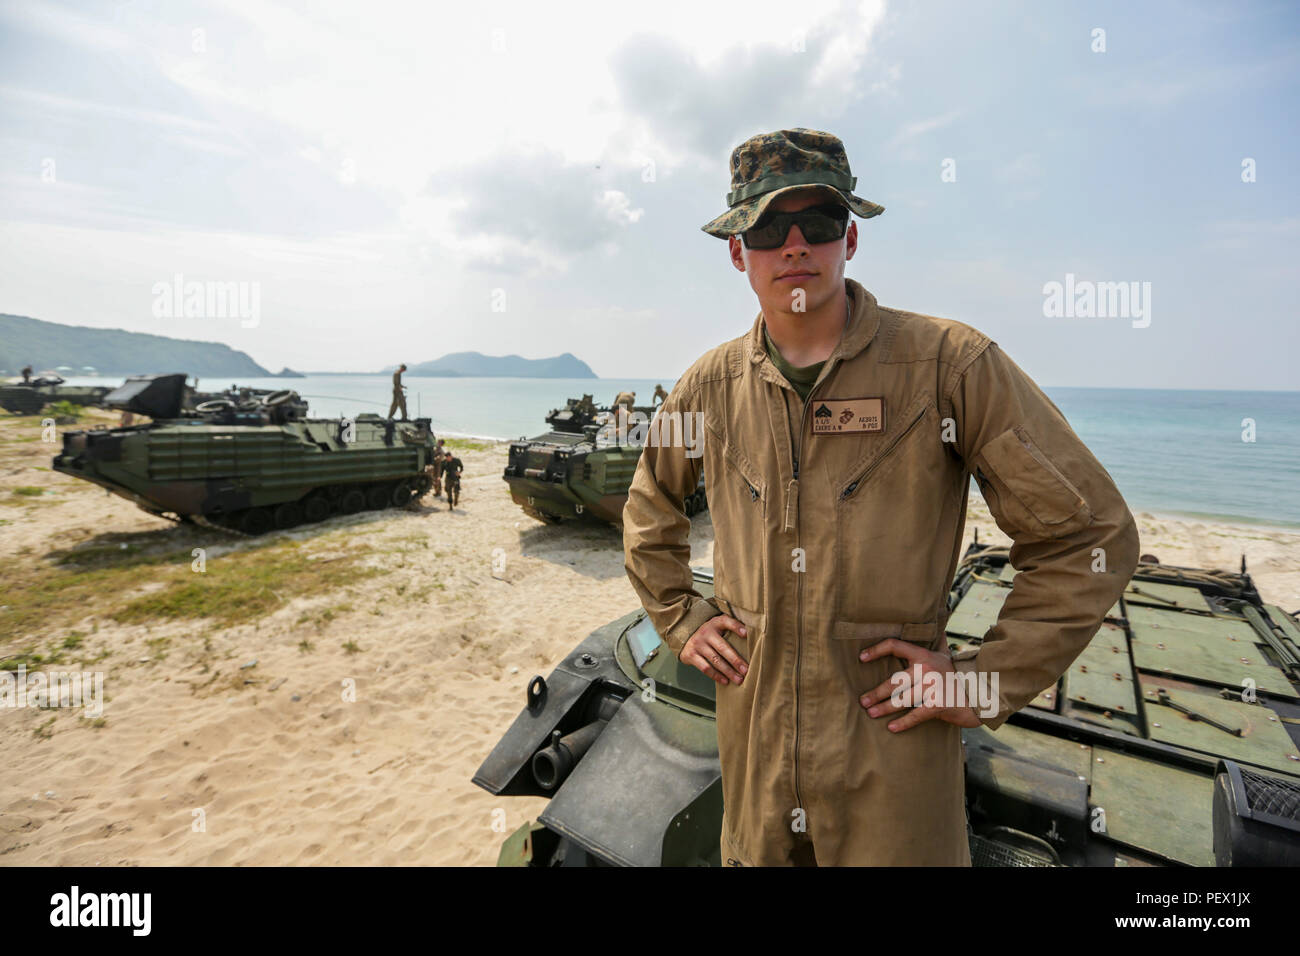 U.S. Marine Corps Cpl. Alex Evers, an assault amphibious vehicle crewman, with 3rd Assault Amphibious Battalion, a native of Cave Creek, Arizona, poses for a photo during an amphibious landing demonstration at Hat Yao, Rayong, Thailand, during exercise Cobra Gold, Feb. 12, 2016. Cobra Gold is a multinational training exercise developed to strengthen security and interoperability between the Kingdom of Thailand, the U.S. and other participating nations. (U.S. Marine Corps Combat Camera photo by Lance Cpl. Eryn L. Edelman/Released) Stock Photo